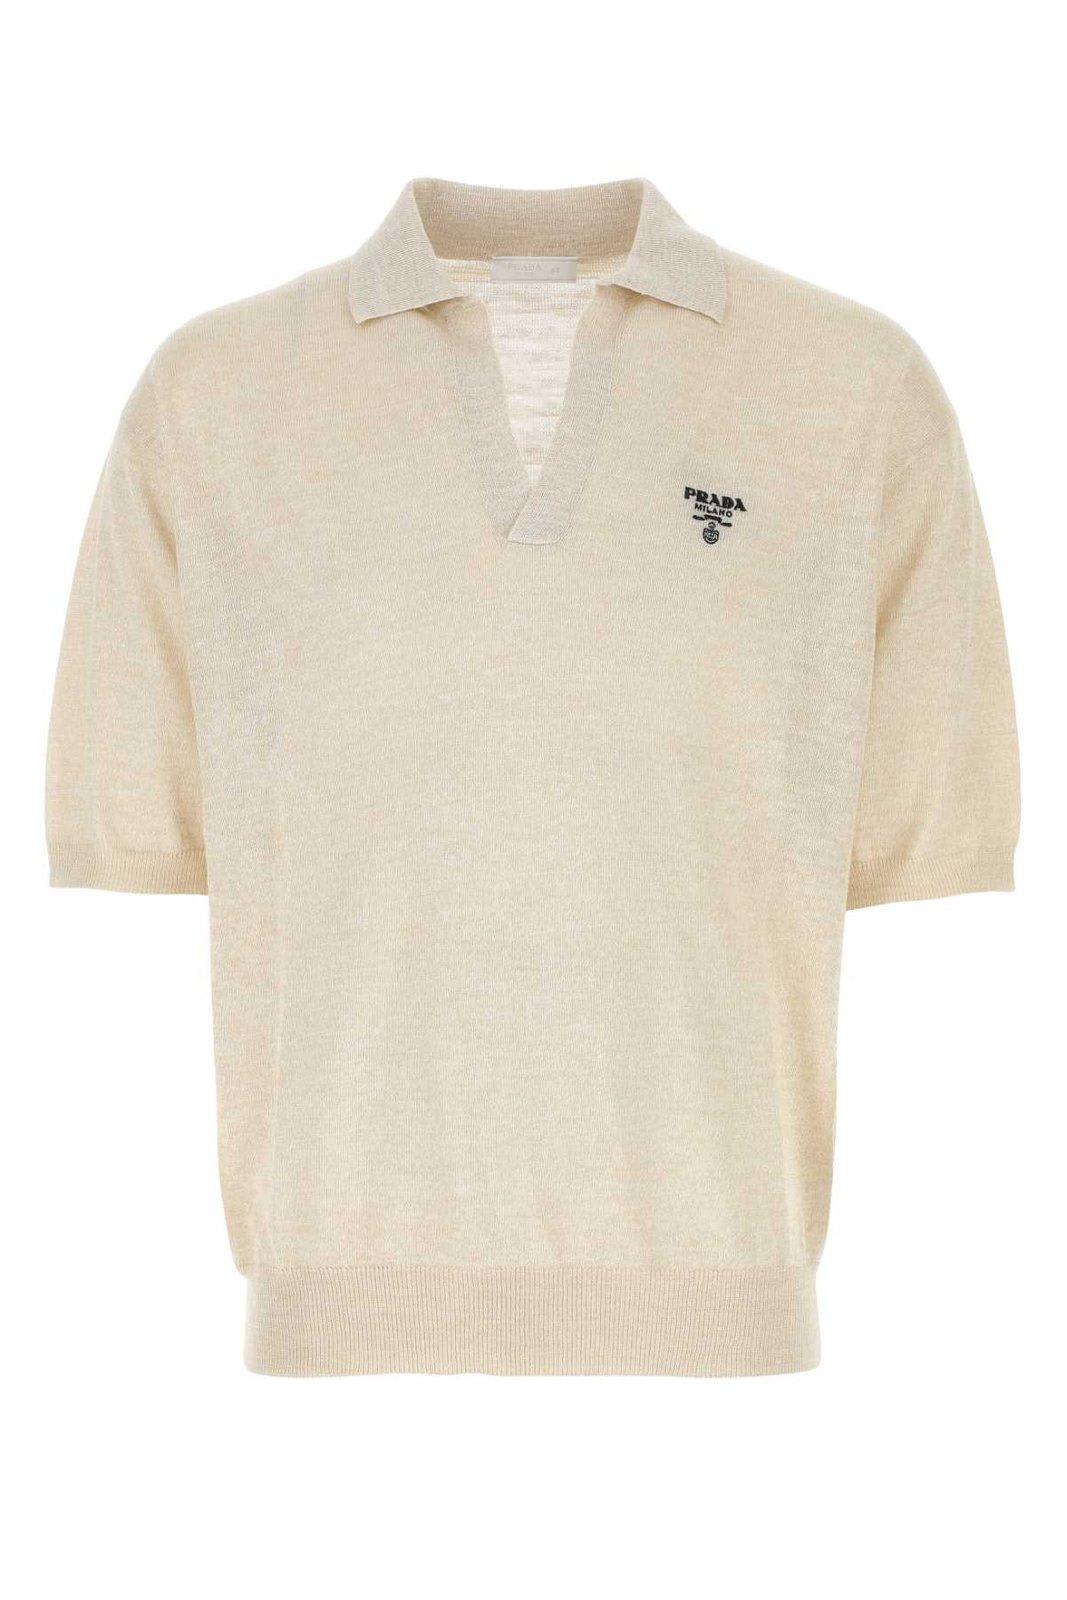 PRADA LOGO EMBROIDERED SHORT SLEEVED KNITTED POLO SHIRT